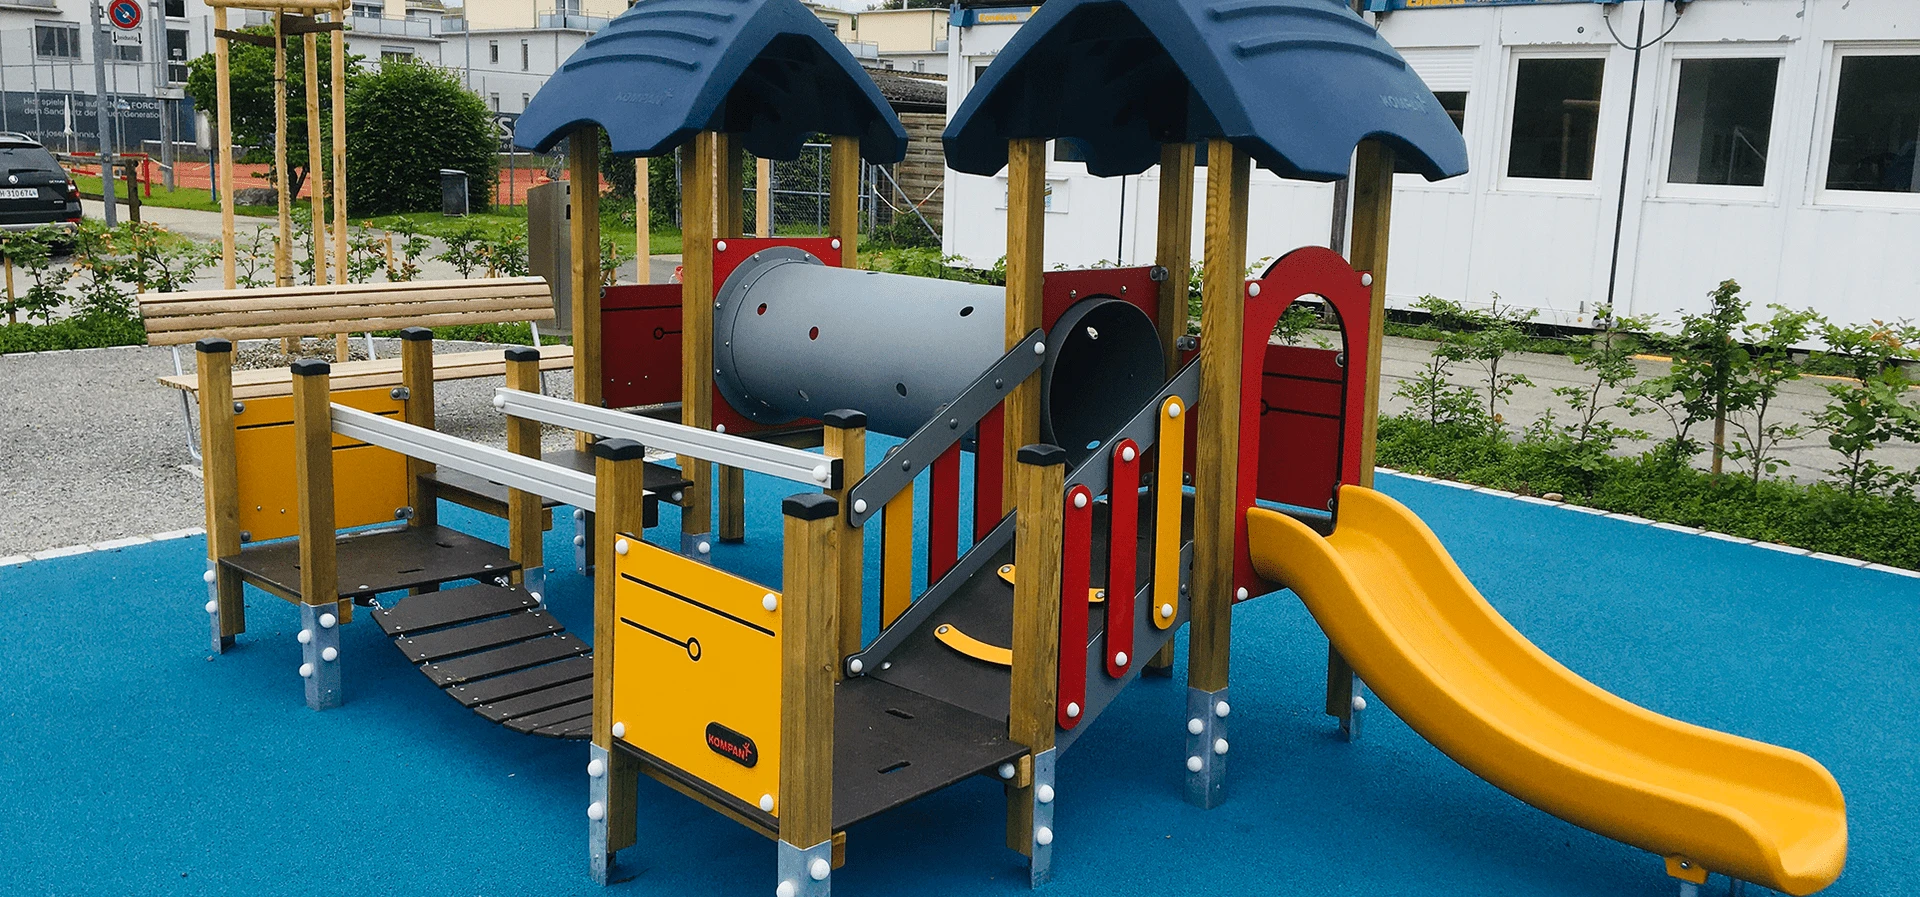 hero of a simple play tower with changeable features at a school